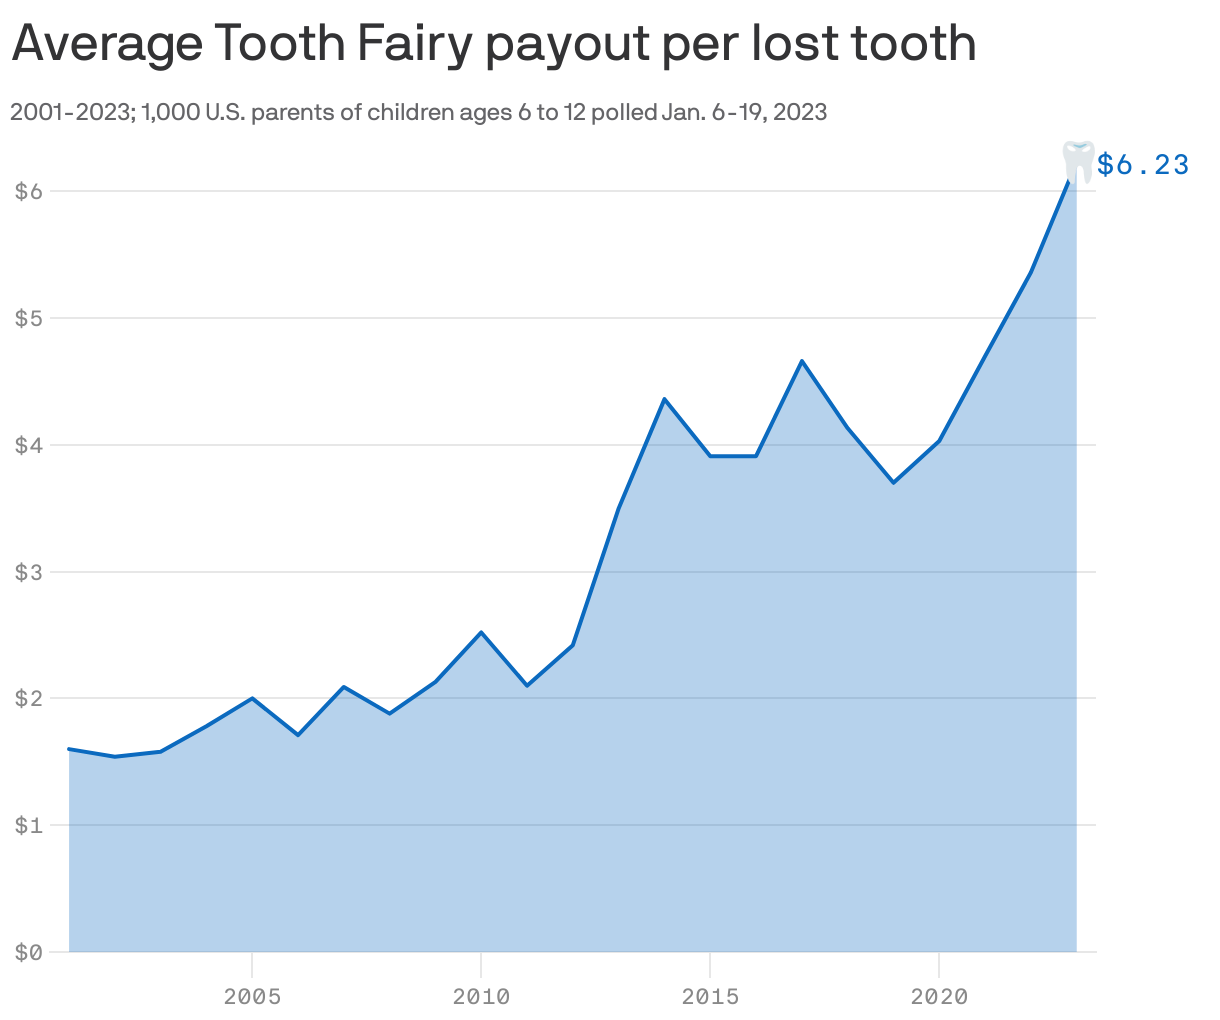 Average Tooth Fairy payout per lost tooth